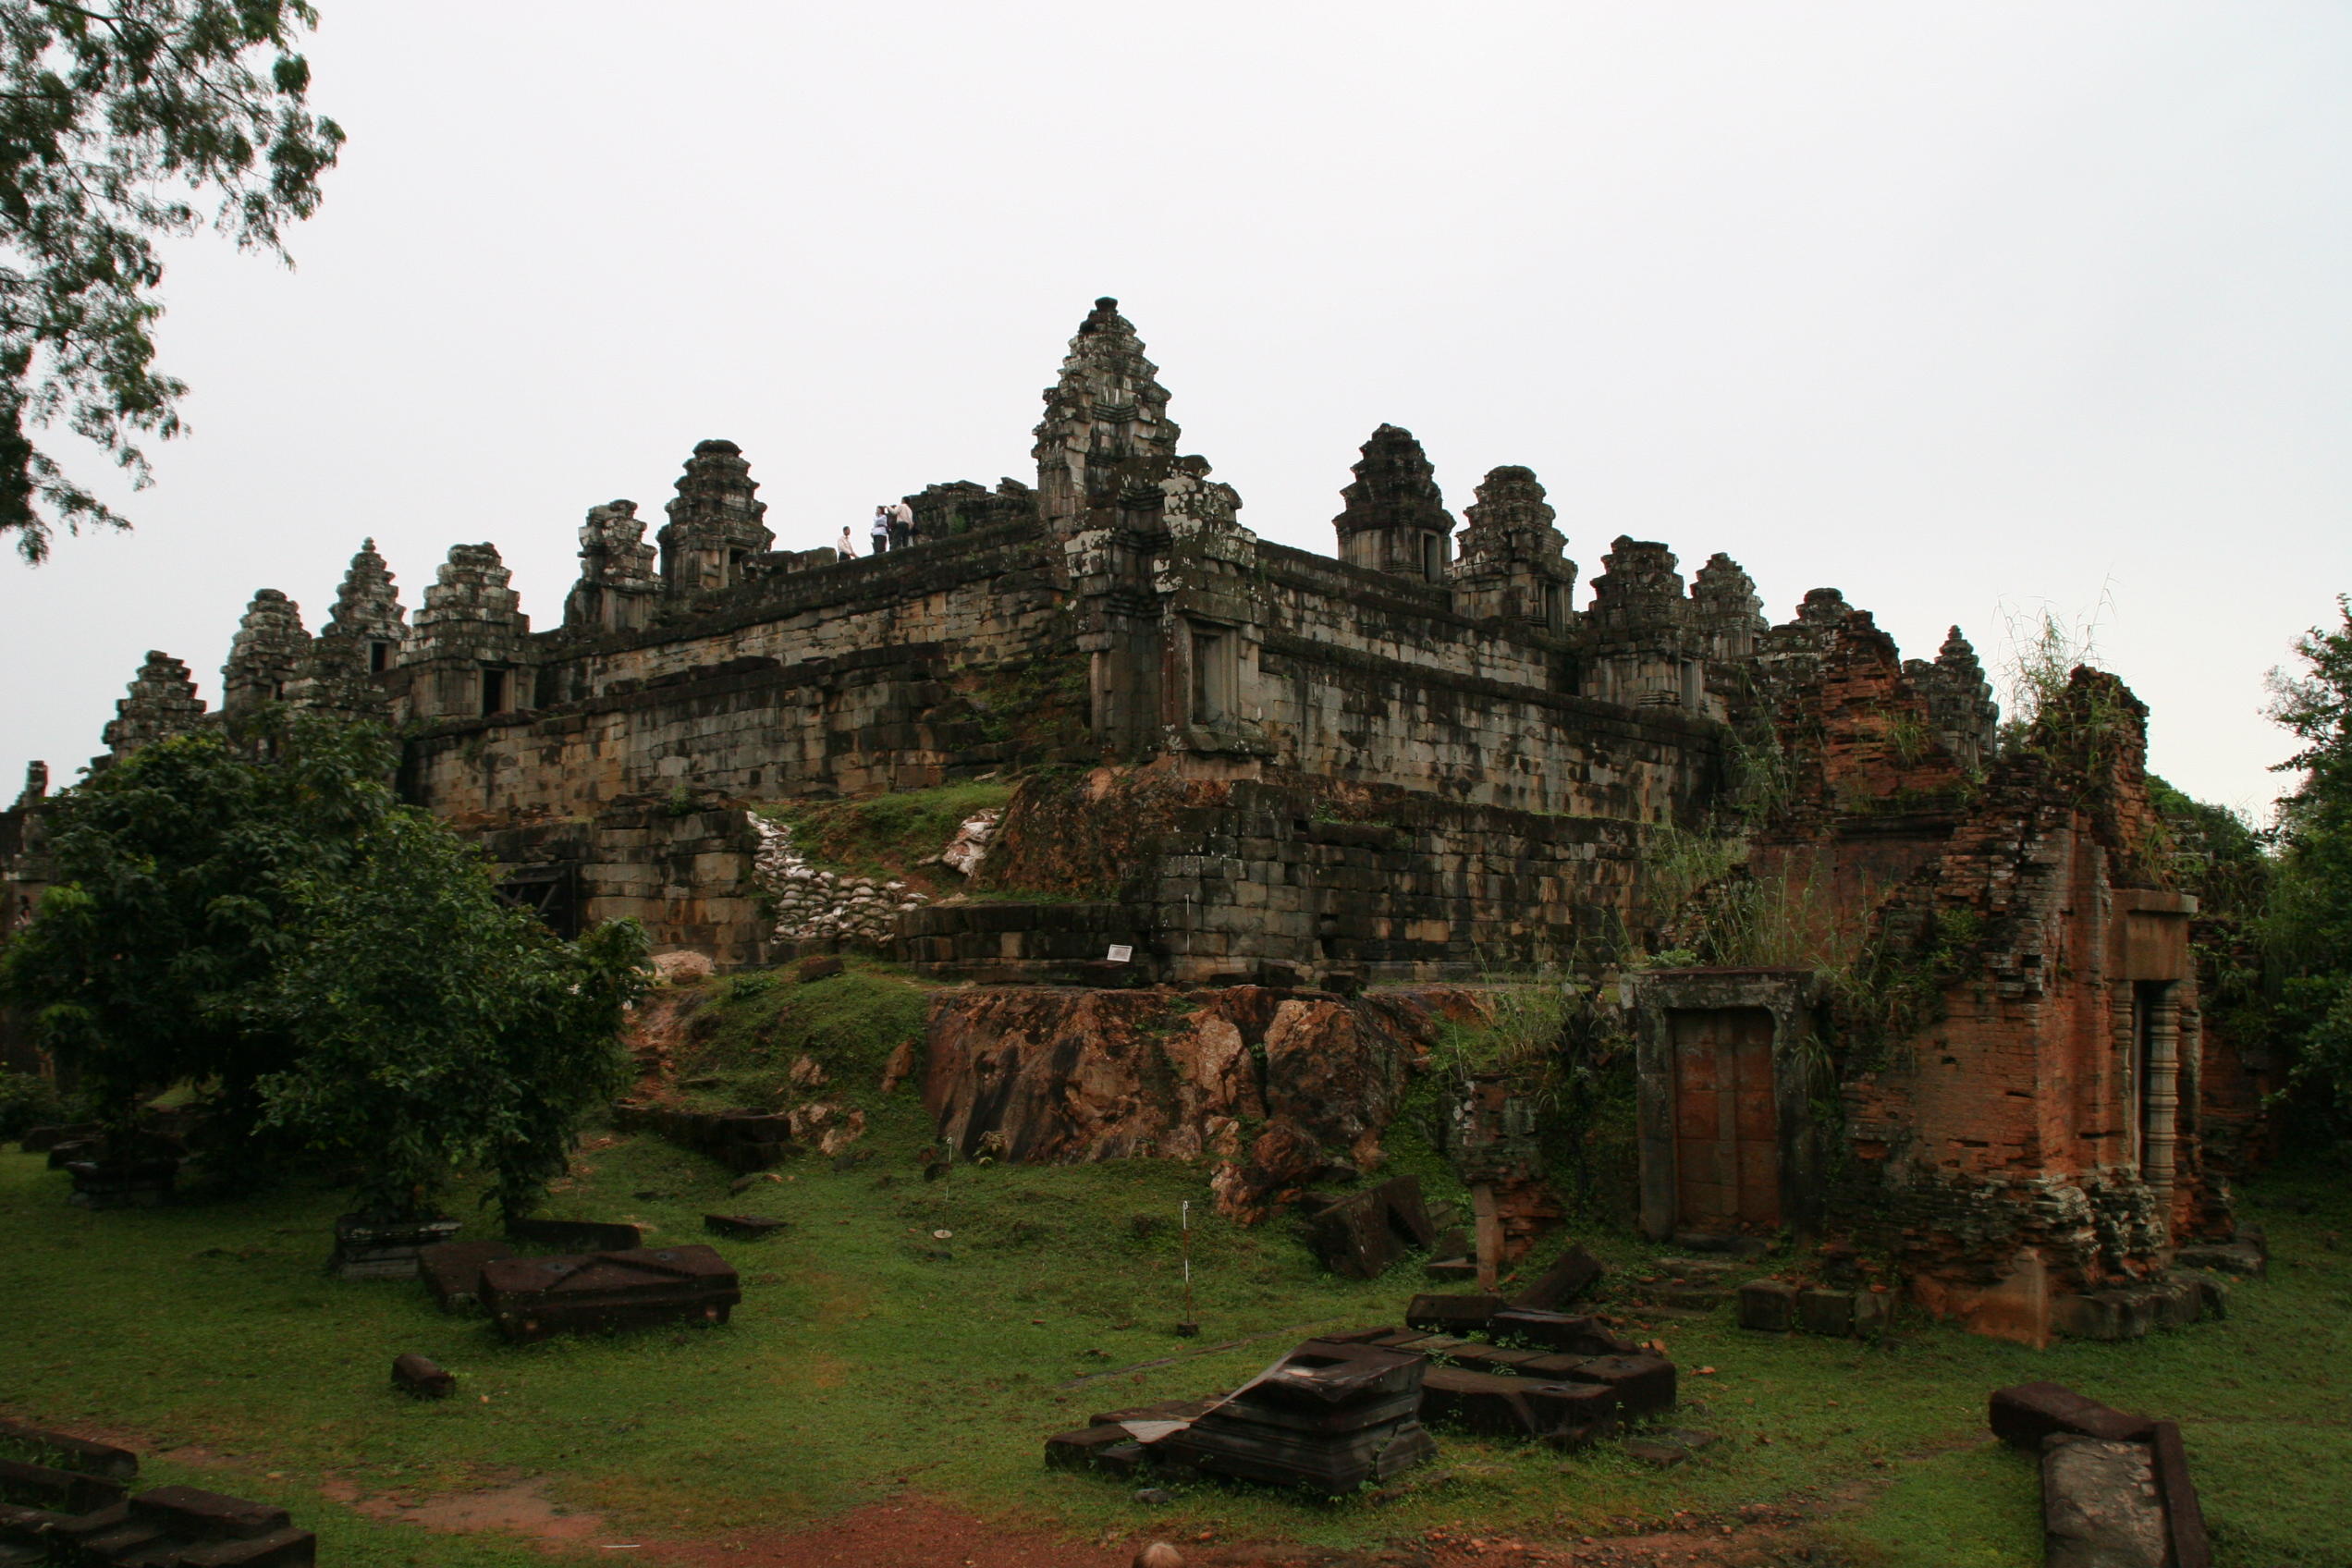 Phnom Bakheng is a mountain temple consisting of five square terraces of diminishing size